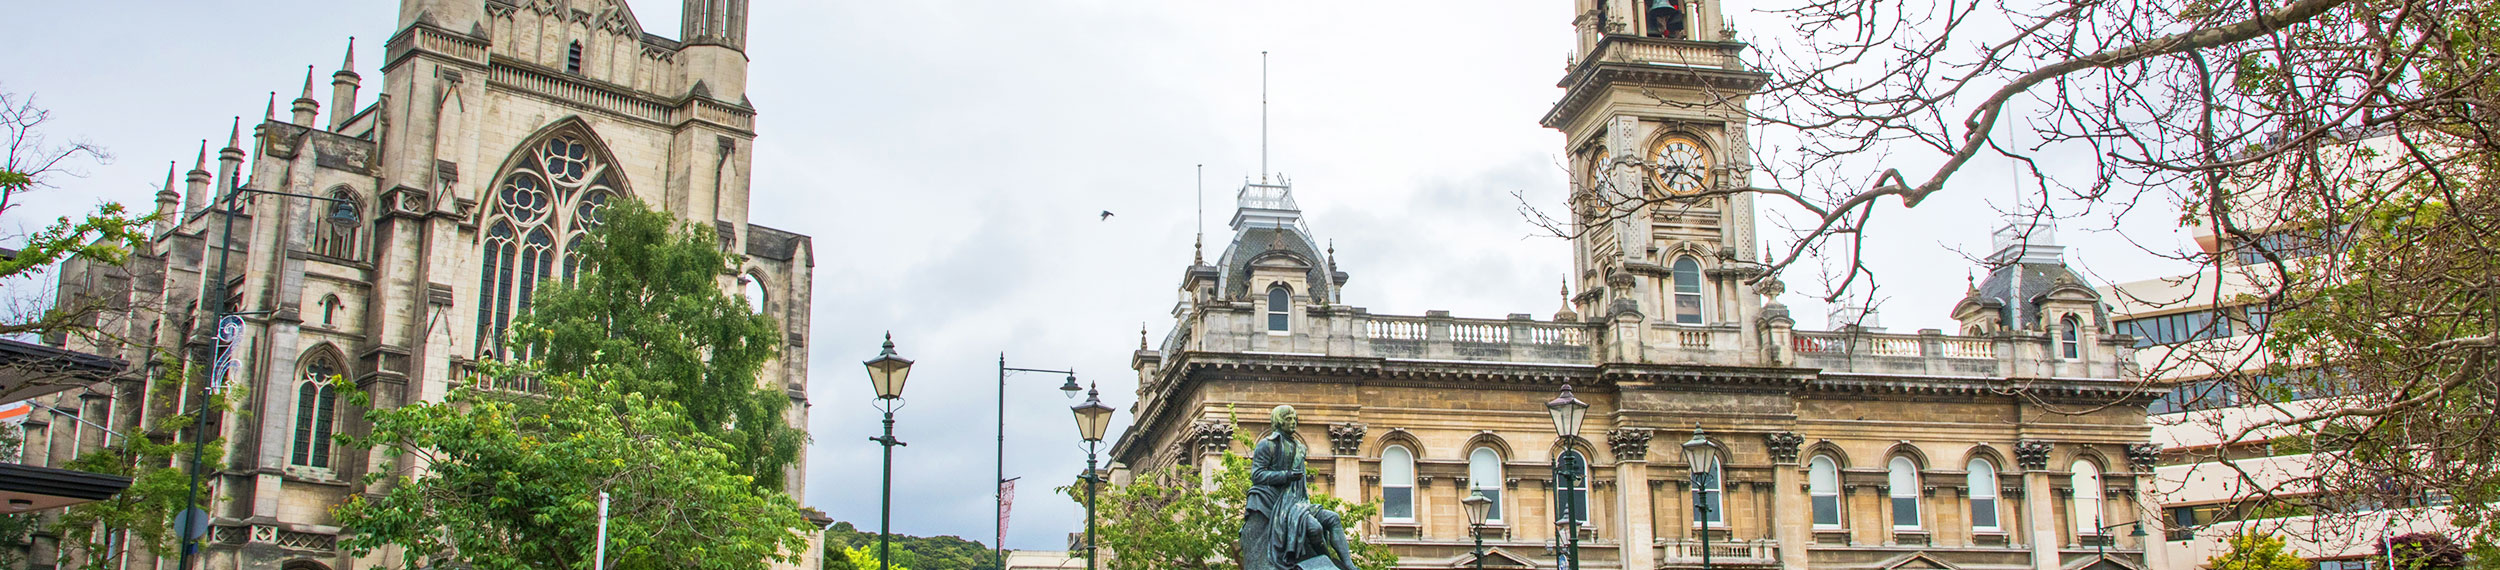 Robert Burns statue, Dunedin Town Hall and St. Paul's Cathedral in Dunedin New Zealand. 